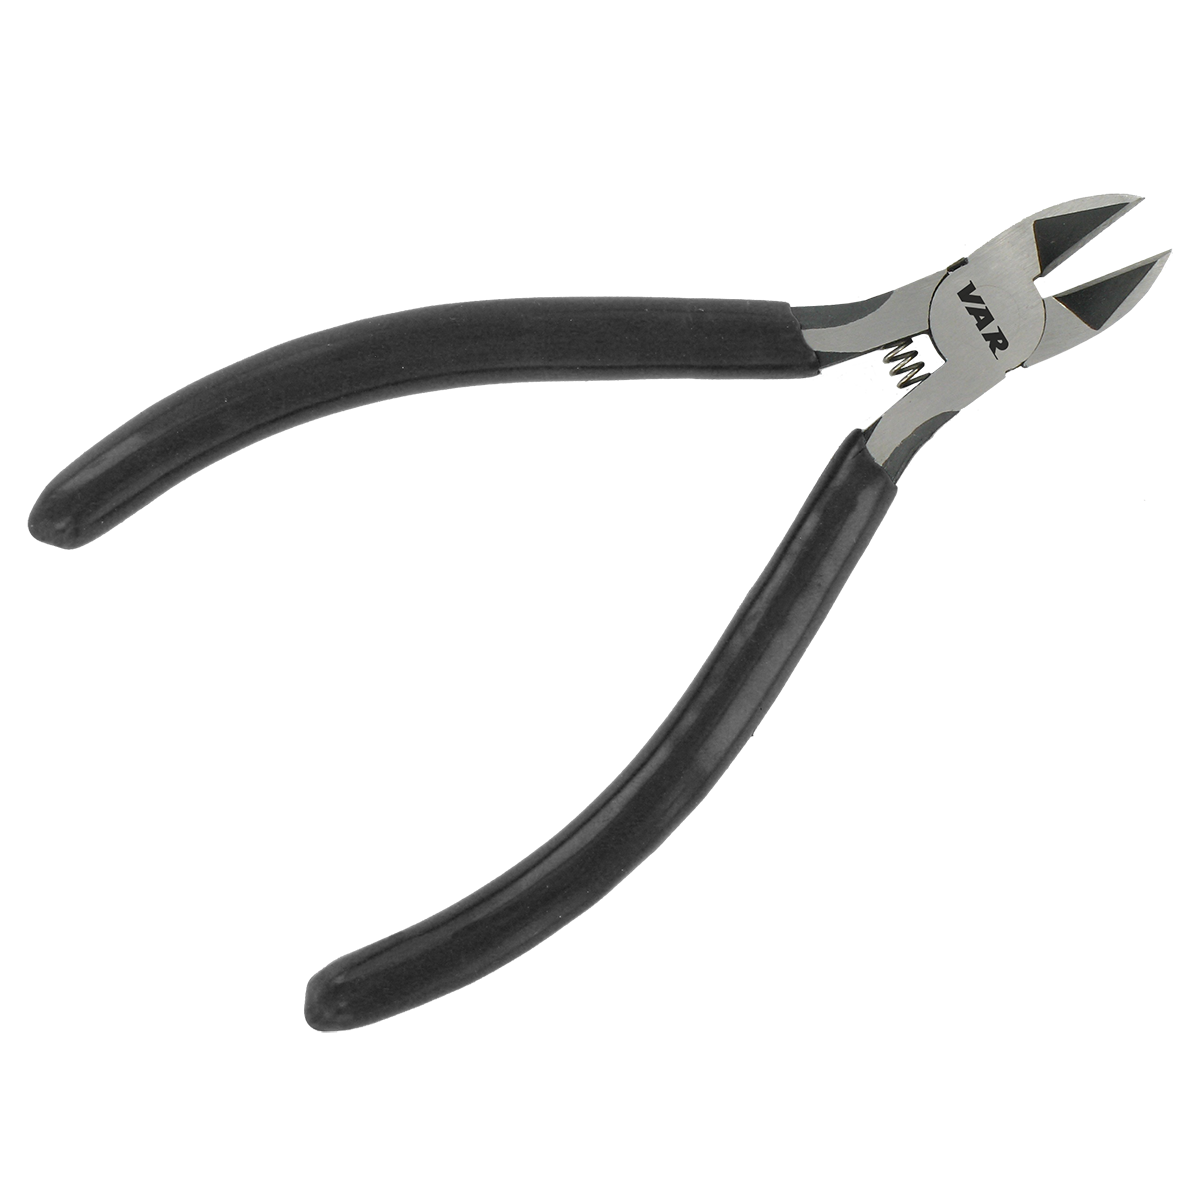 Small side cutting pliers